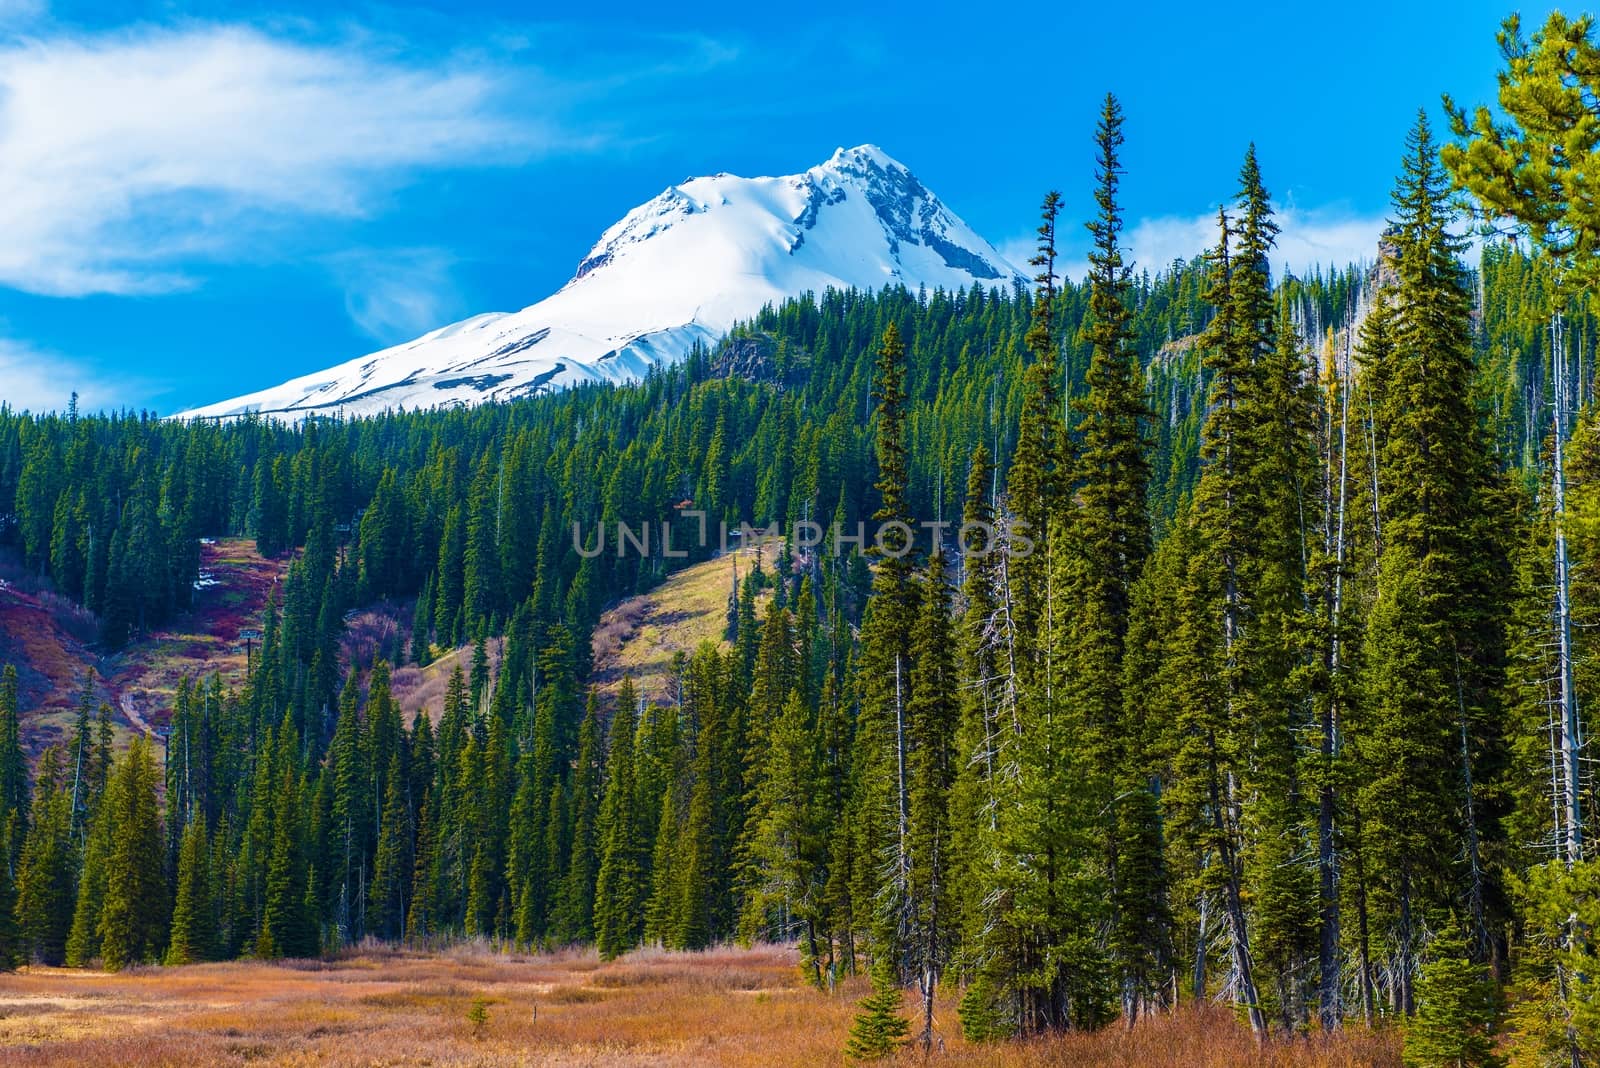 Snowy Peak of Mount Hood in the Cascade Volcanic Arc of Northern Oregon, United States. Oregon Landscape.